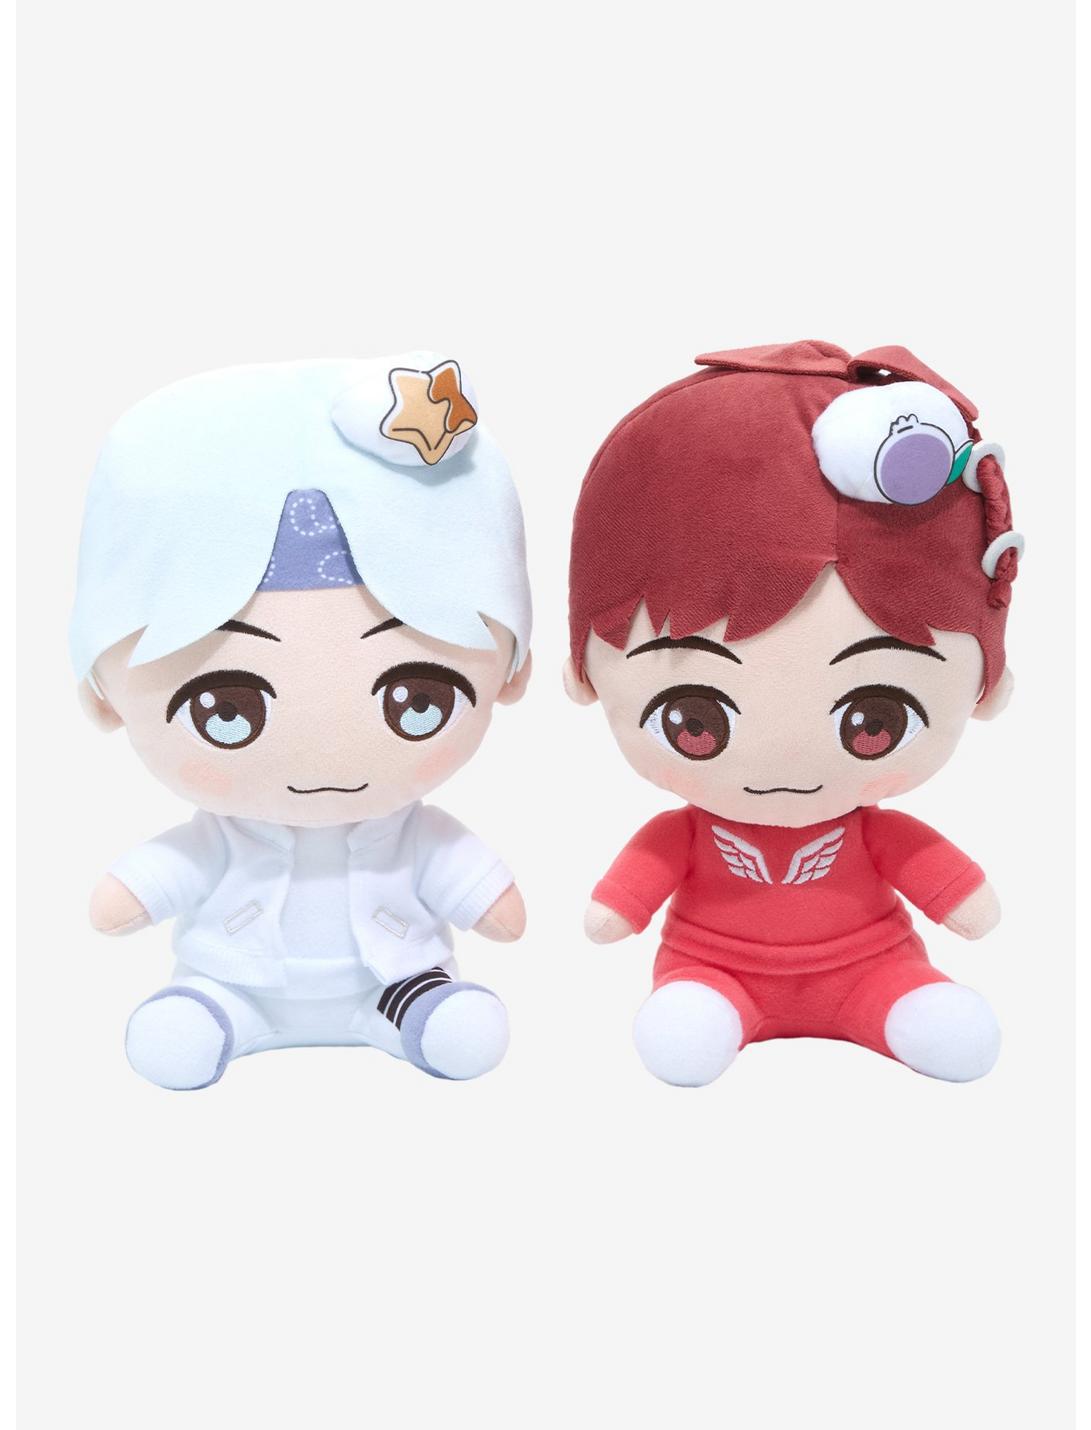 TinyTAN Sweet Time Suga & J-Hope Assorted Blind Plush Inspired By BTS, , hi-res